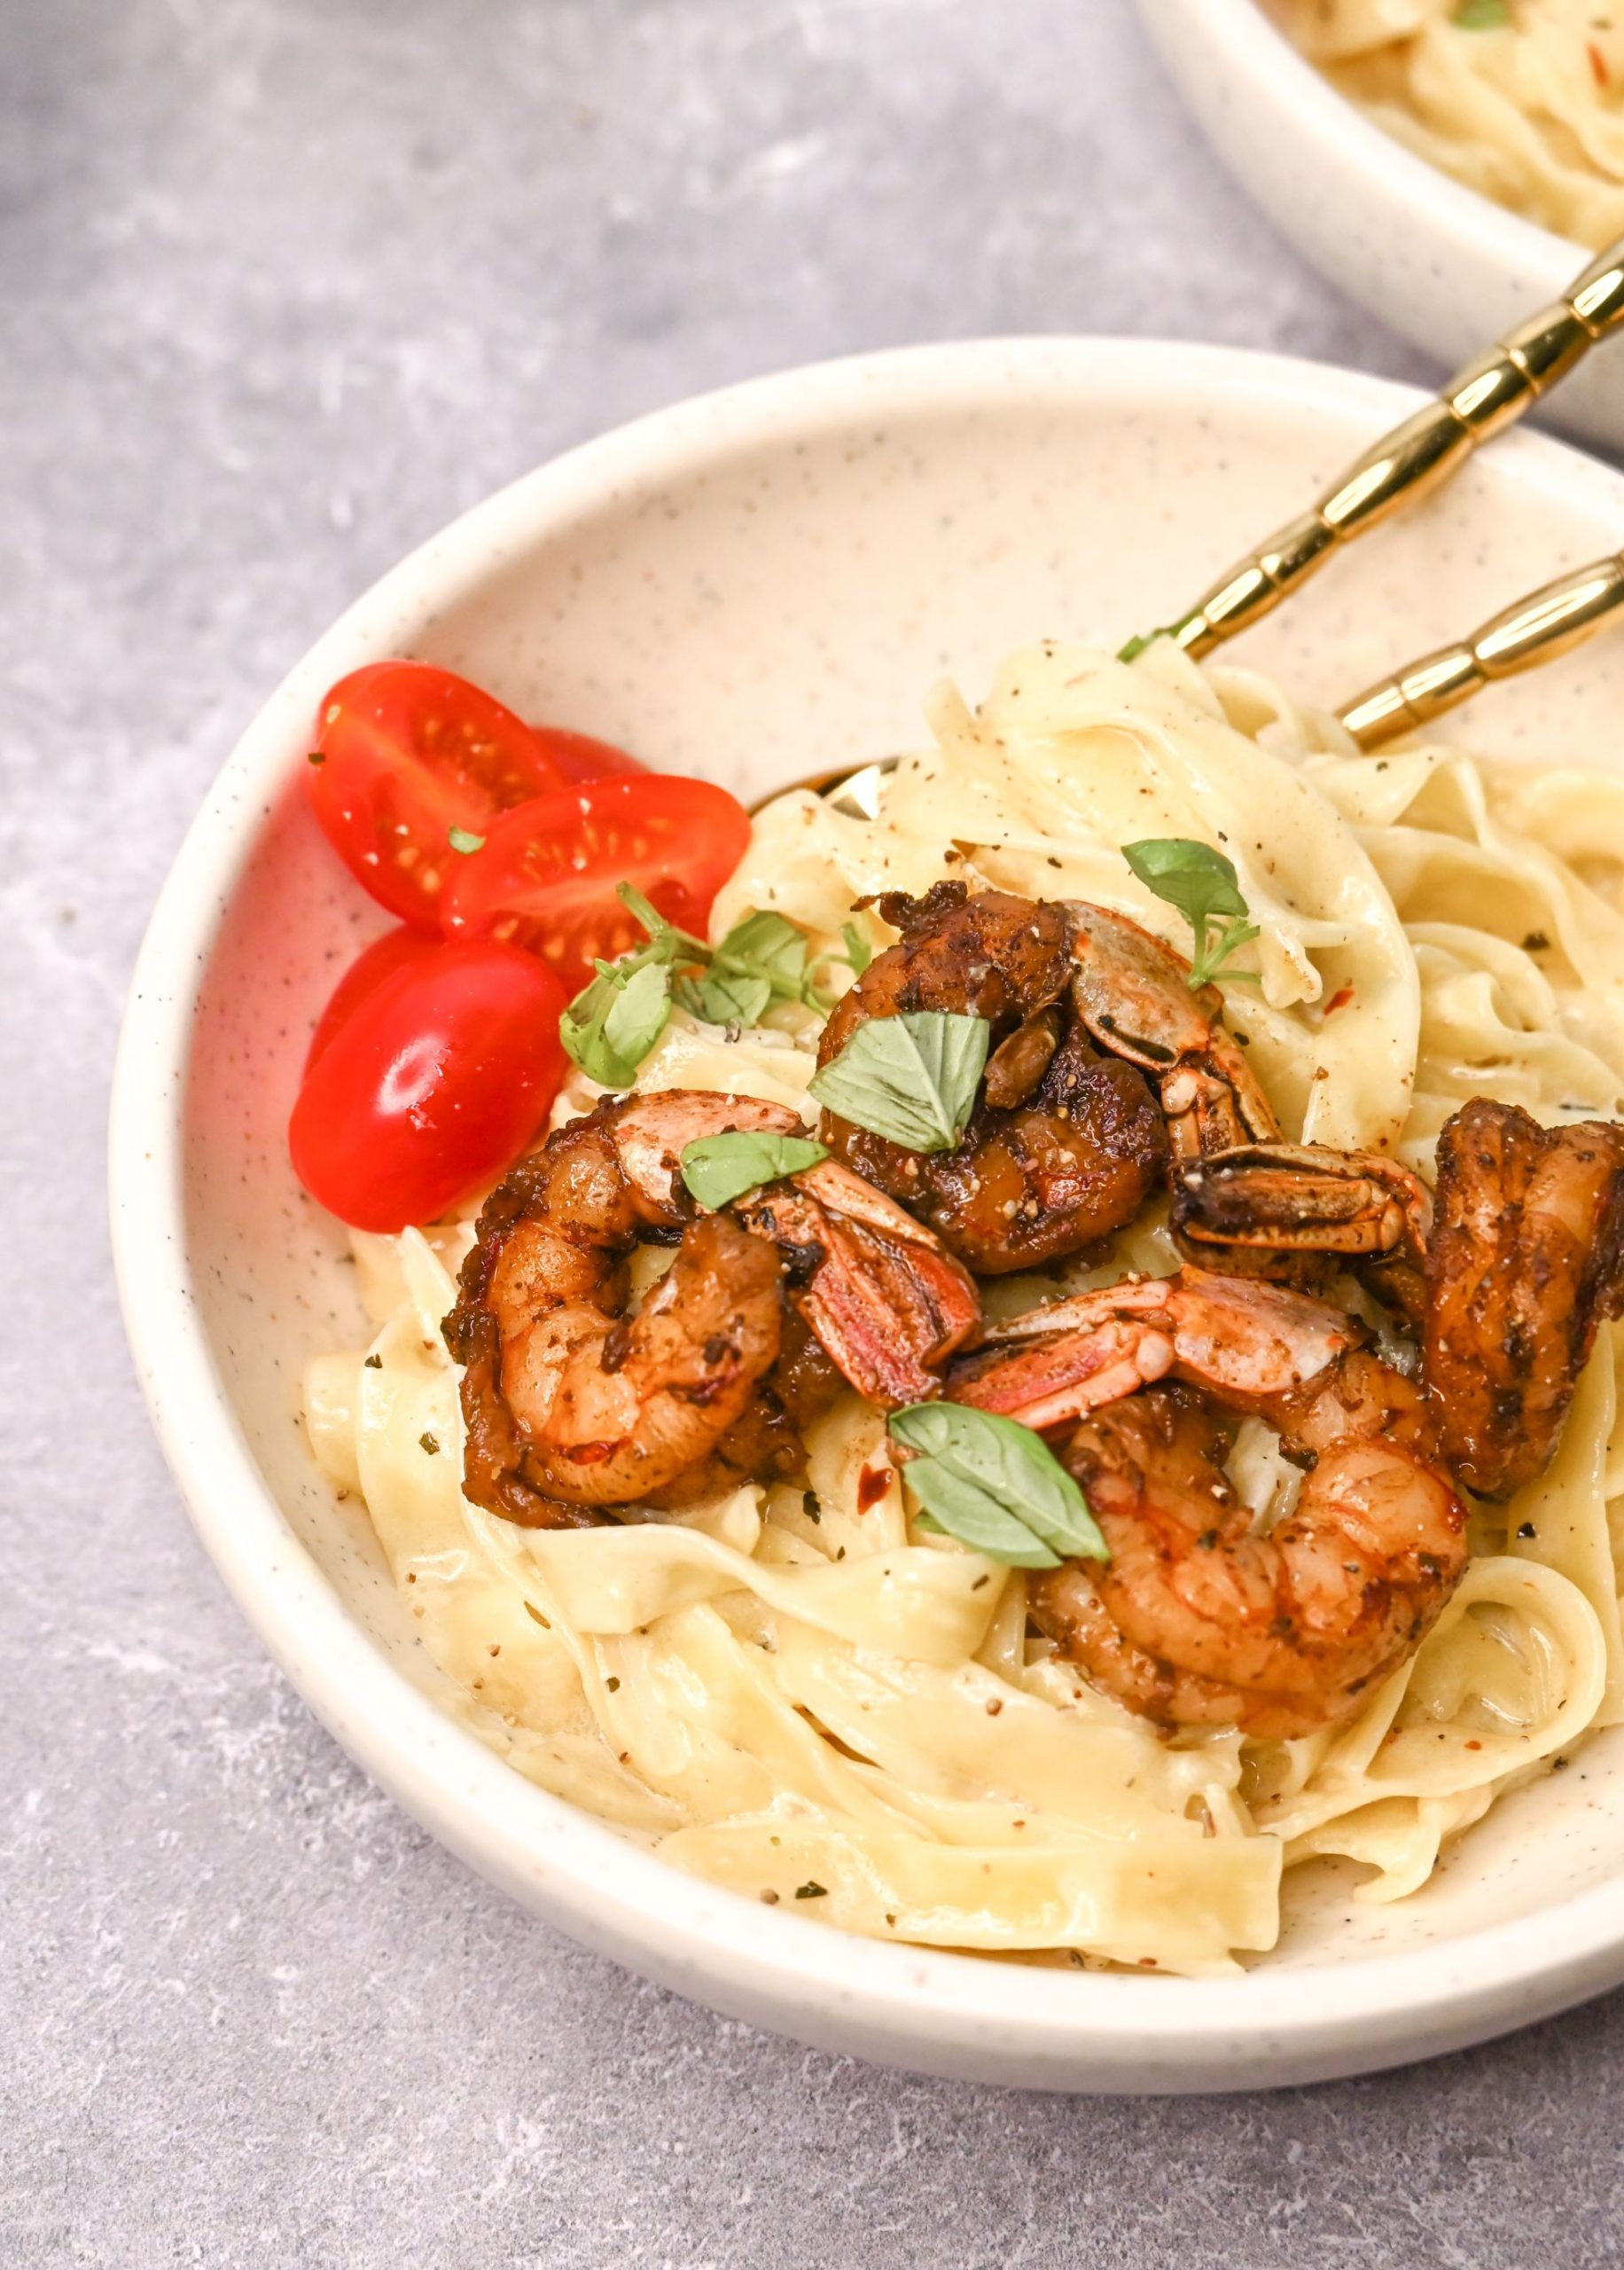 Cajun shrimp on top of some creamy pasta served in a white bowl with chopped cherry tomatoes on the side